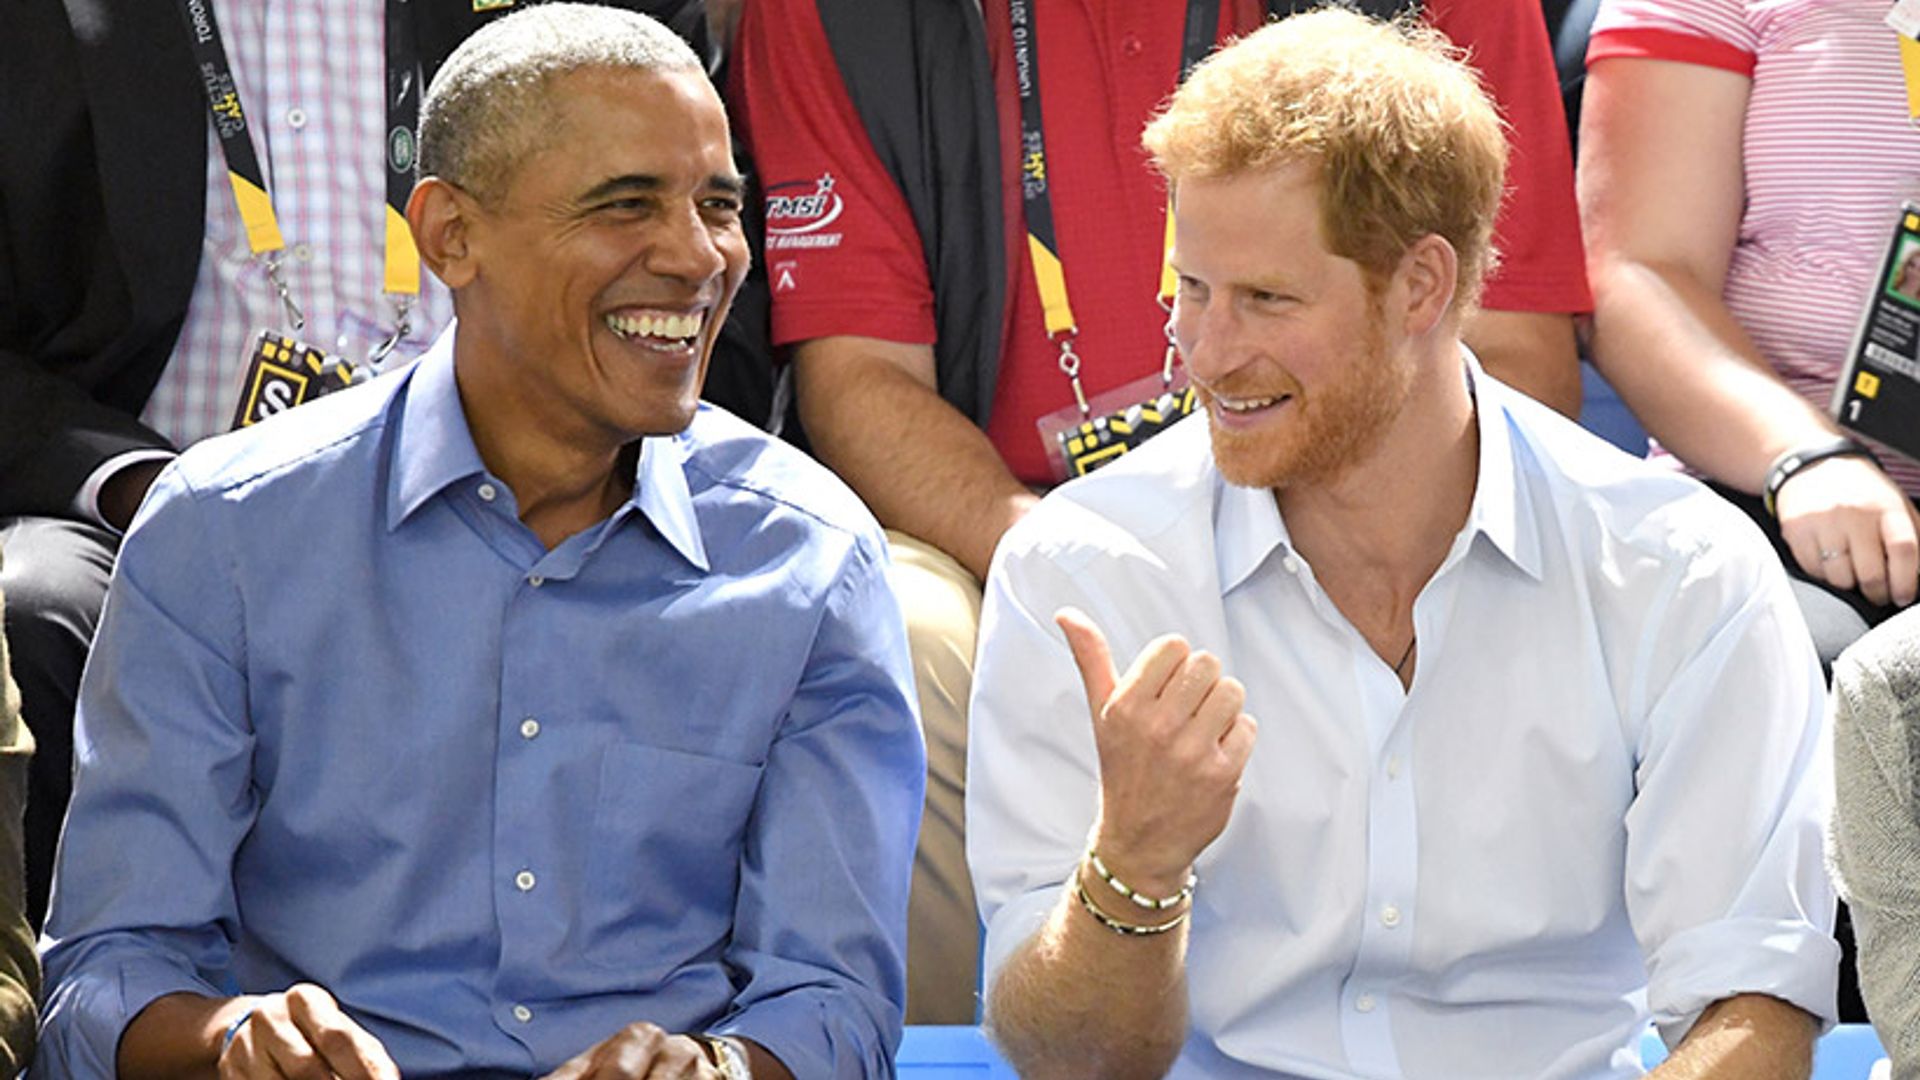 Barack Obama ‘quizzes Prince Harry on girlfriend Meghan’ at Invictus Games!